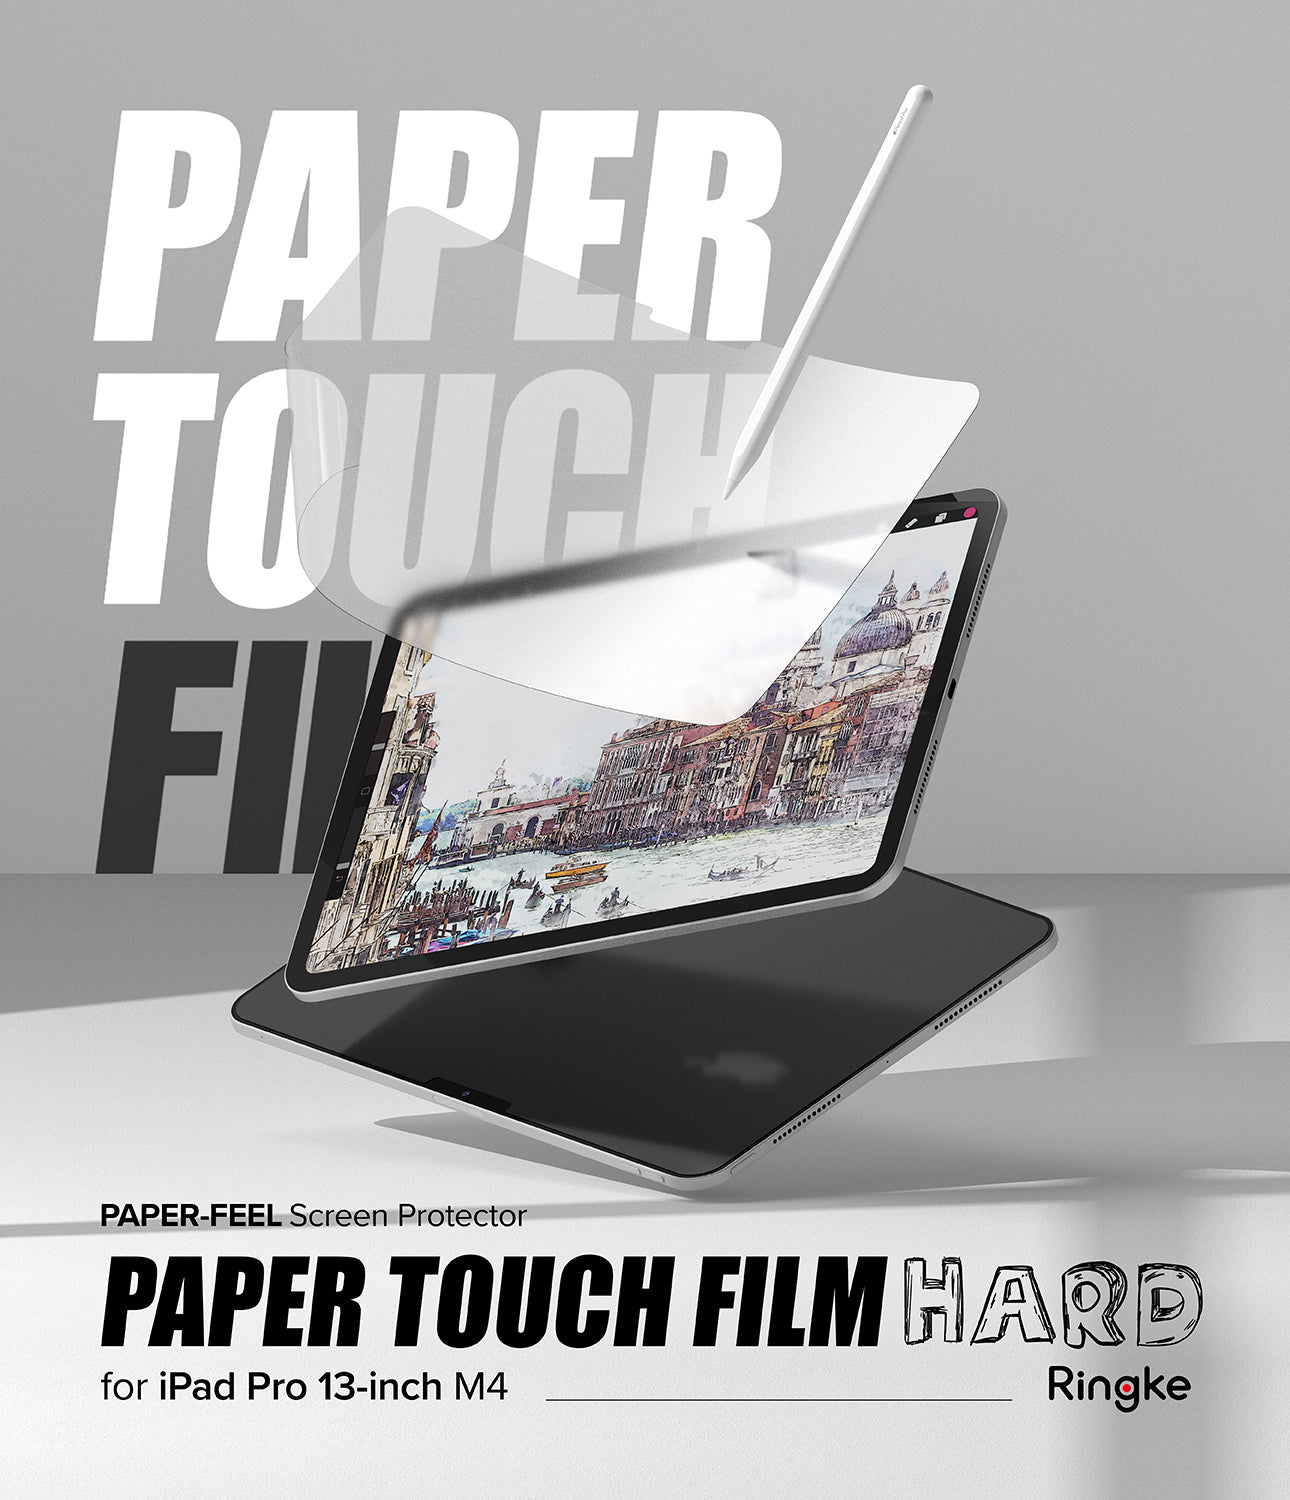 iPad Pro 13" (M4) Screen Protector | Paper Touch Film - By Ringke